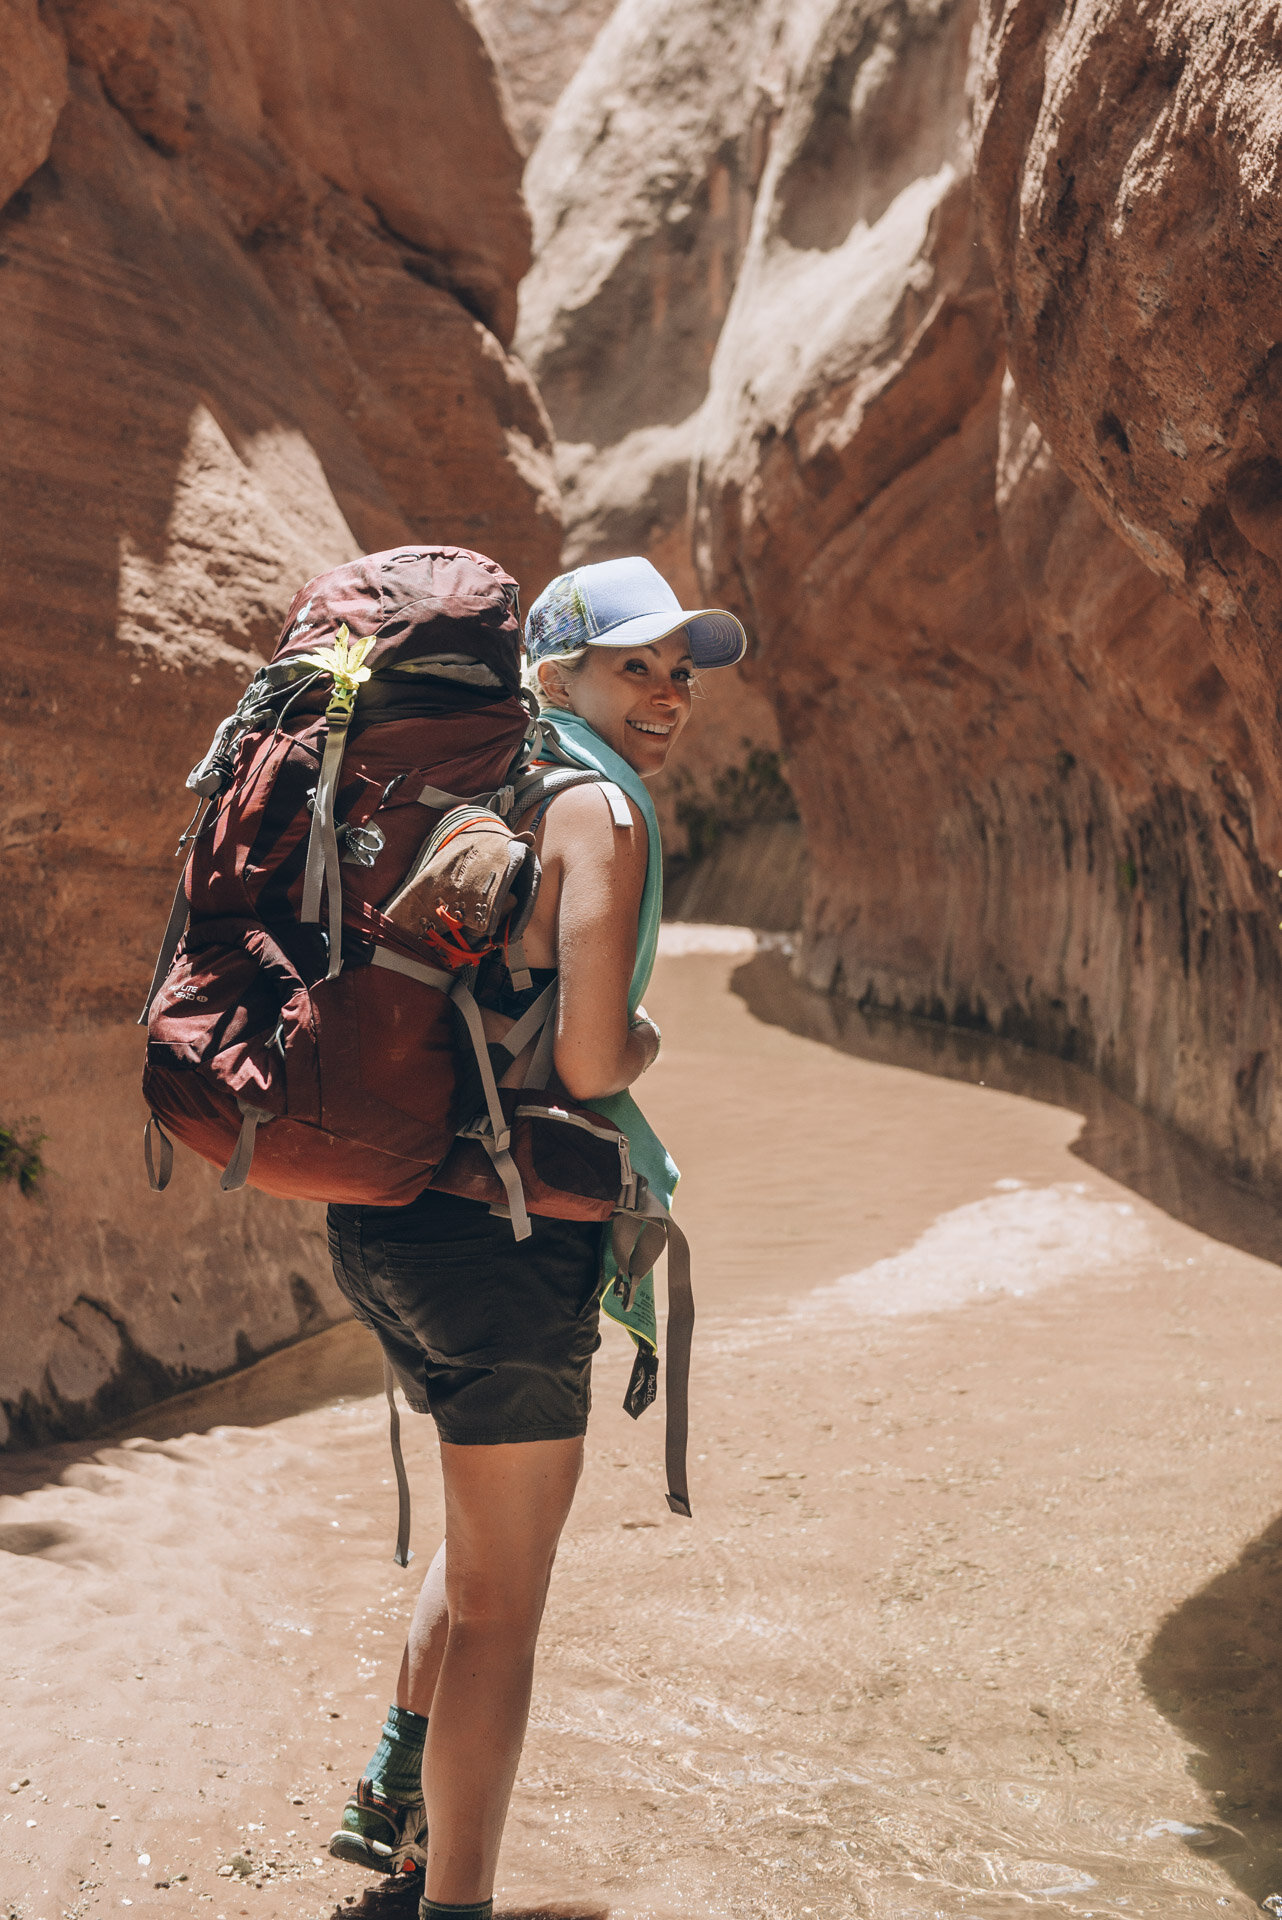 Sarah Herron on Spring backpacking trip to Forty Mile Creek &amp; Willow Canyon via Hole-in-the-Rock Road in Grand Staircase Escalante National Monument, Utah